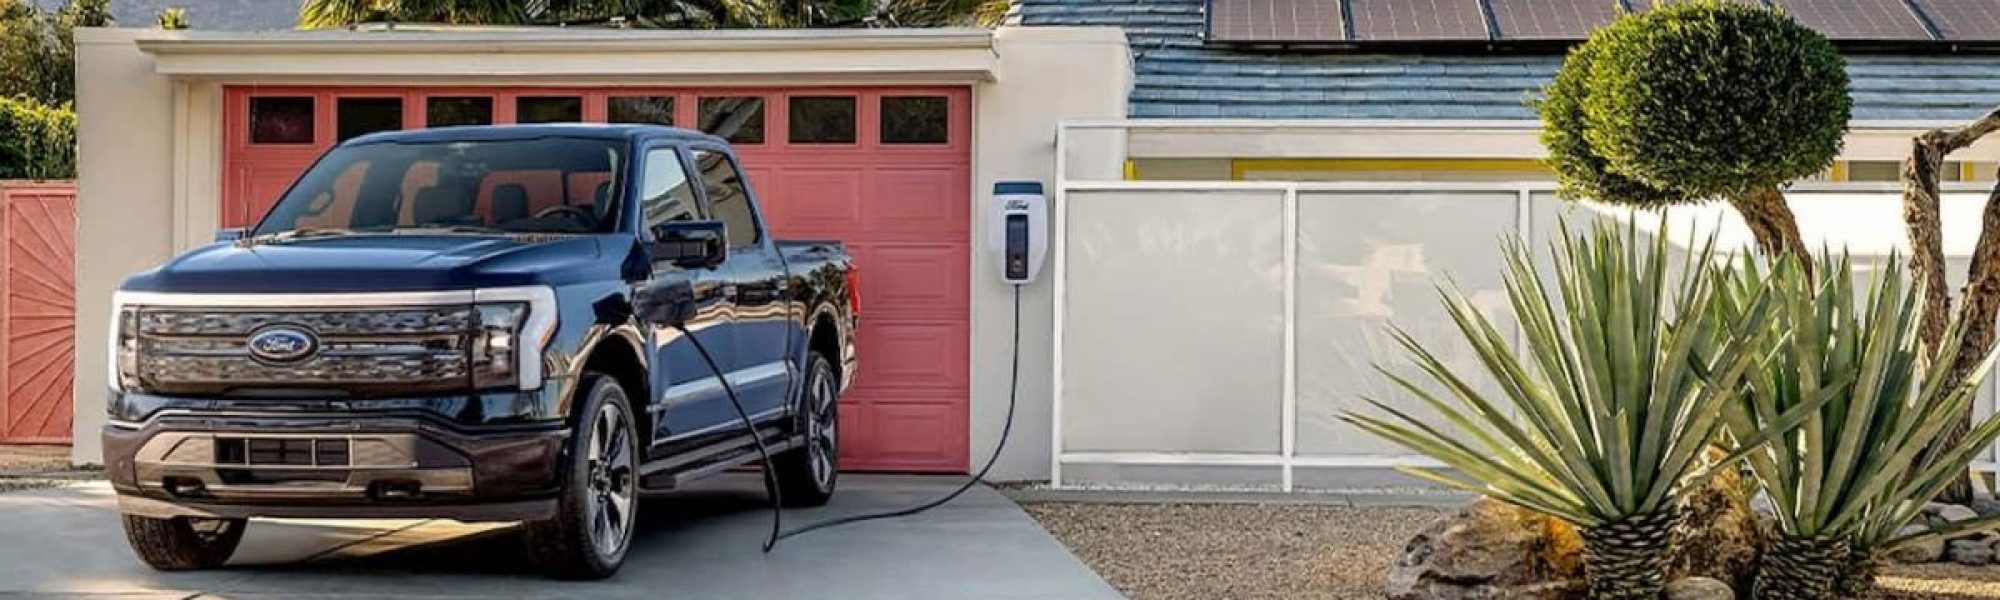 Ford, GM, Google, and solar providers unite to showcase the full potential of electric vehicles